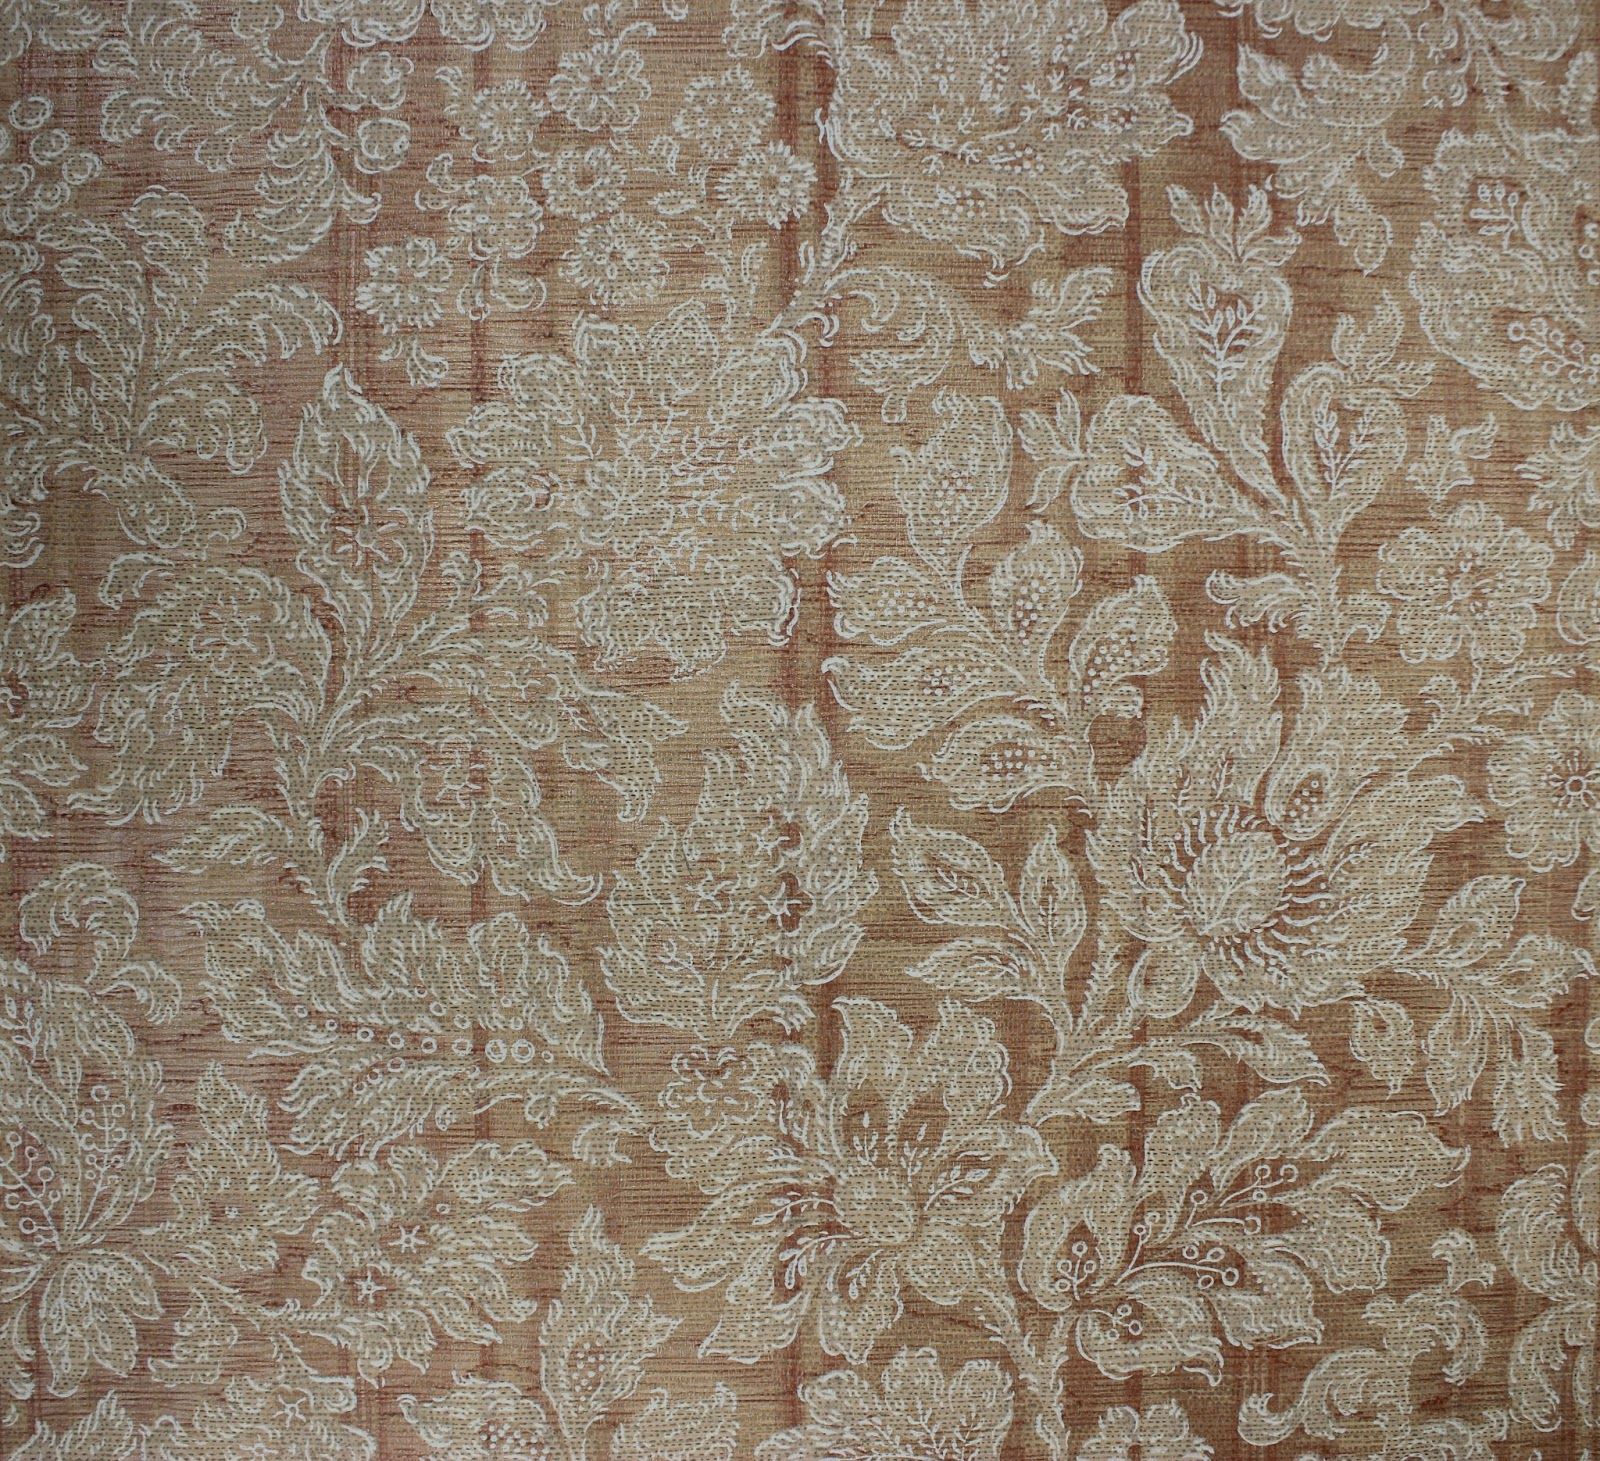 Early 1900's Patterns , HD Wallpaper & Backgrounds